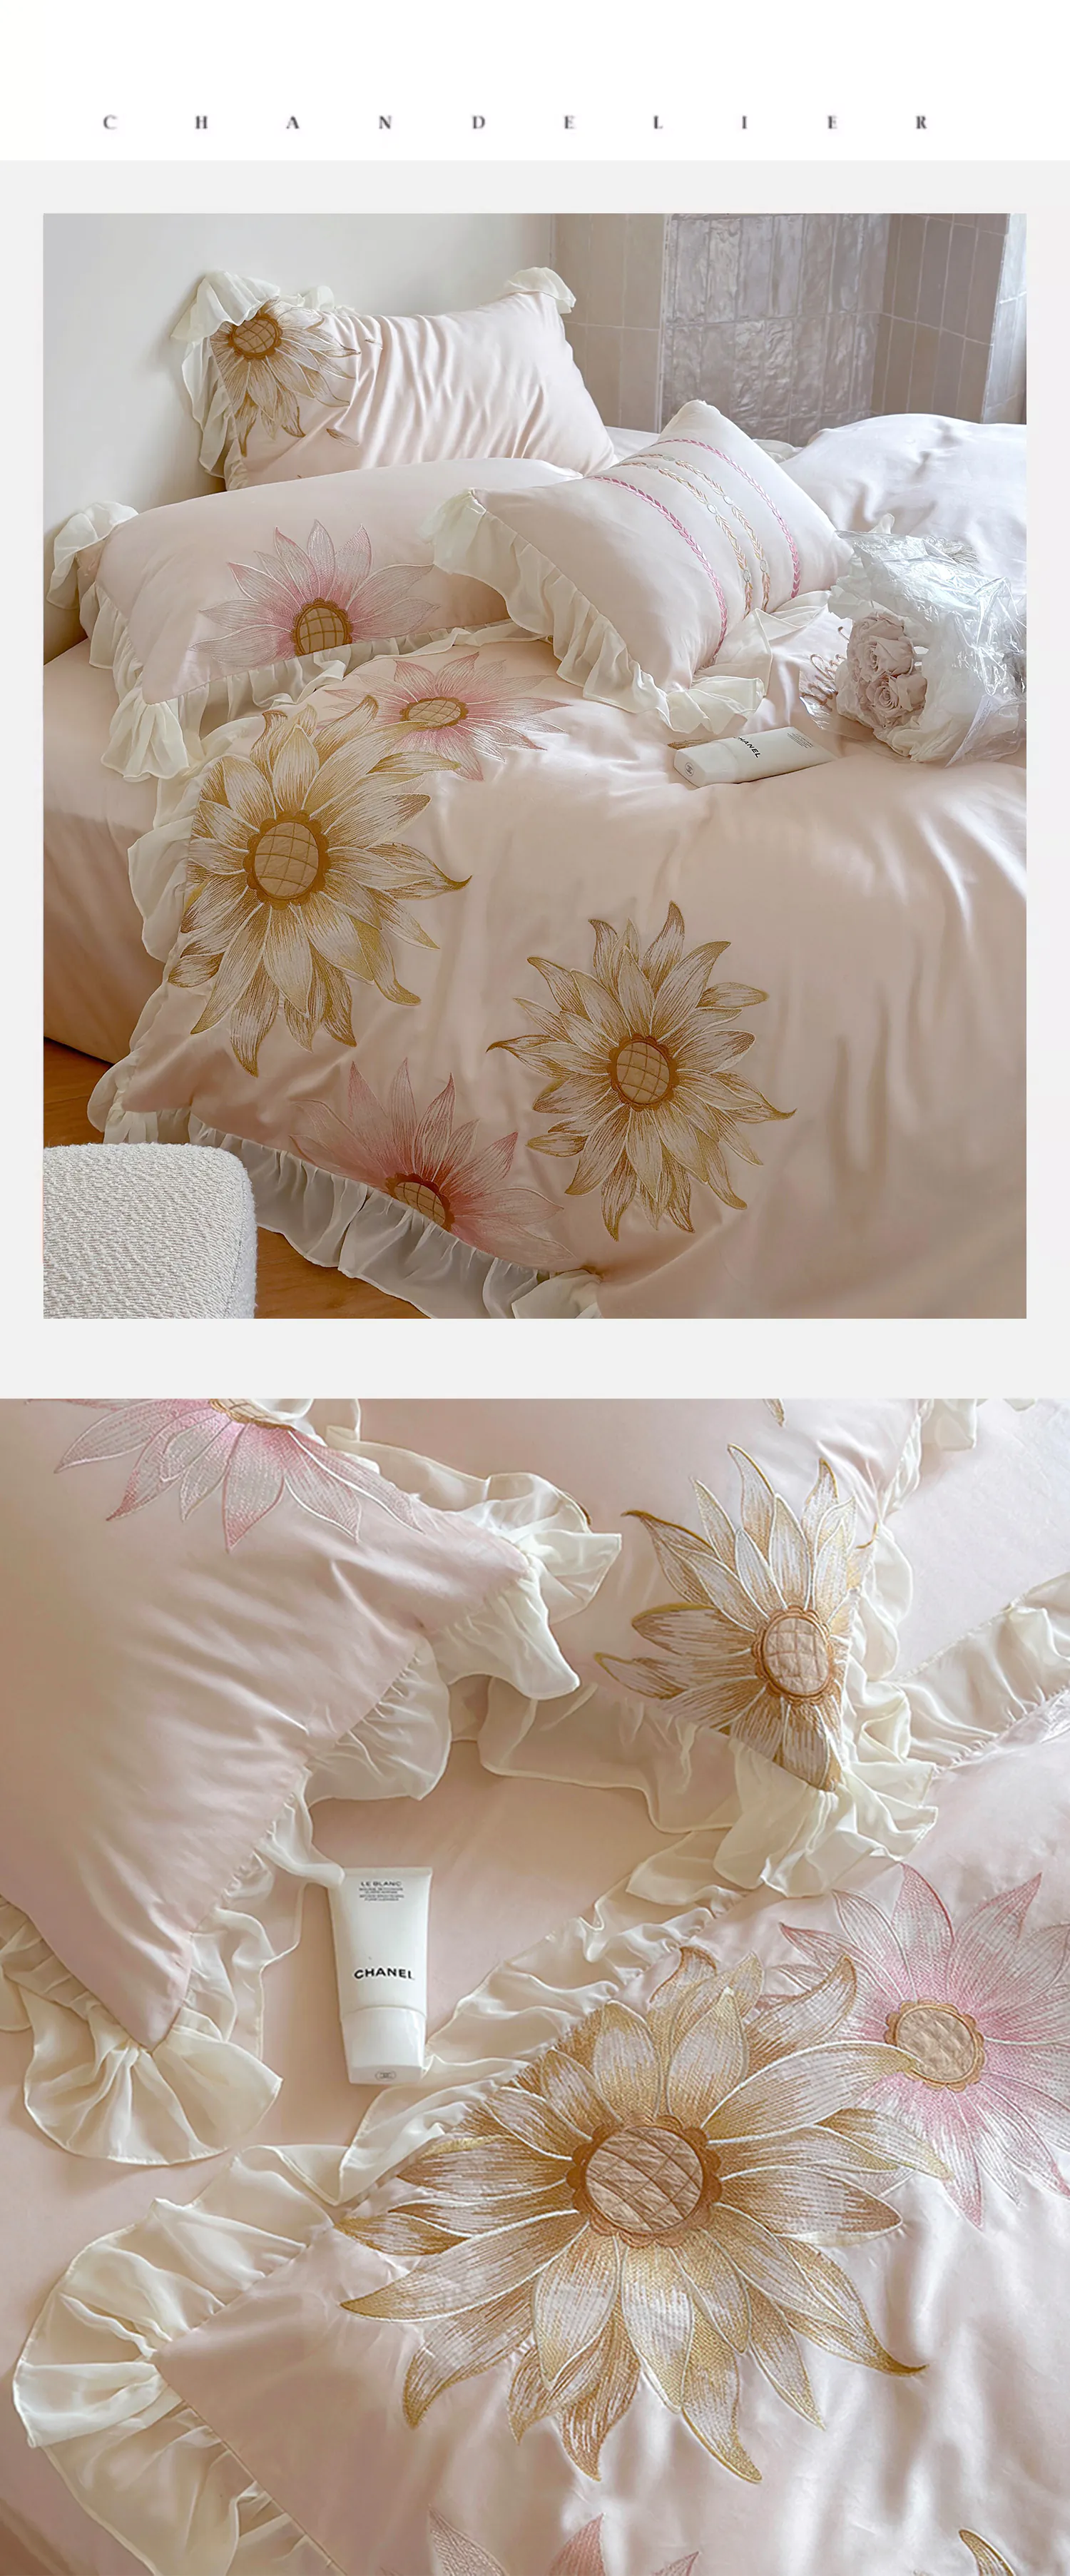 Soft-100-Egypt-Cotton-Embroidery-Ruffle-Bedding-Set-with-Sunflower19